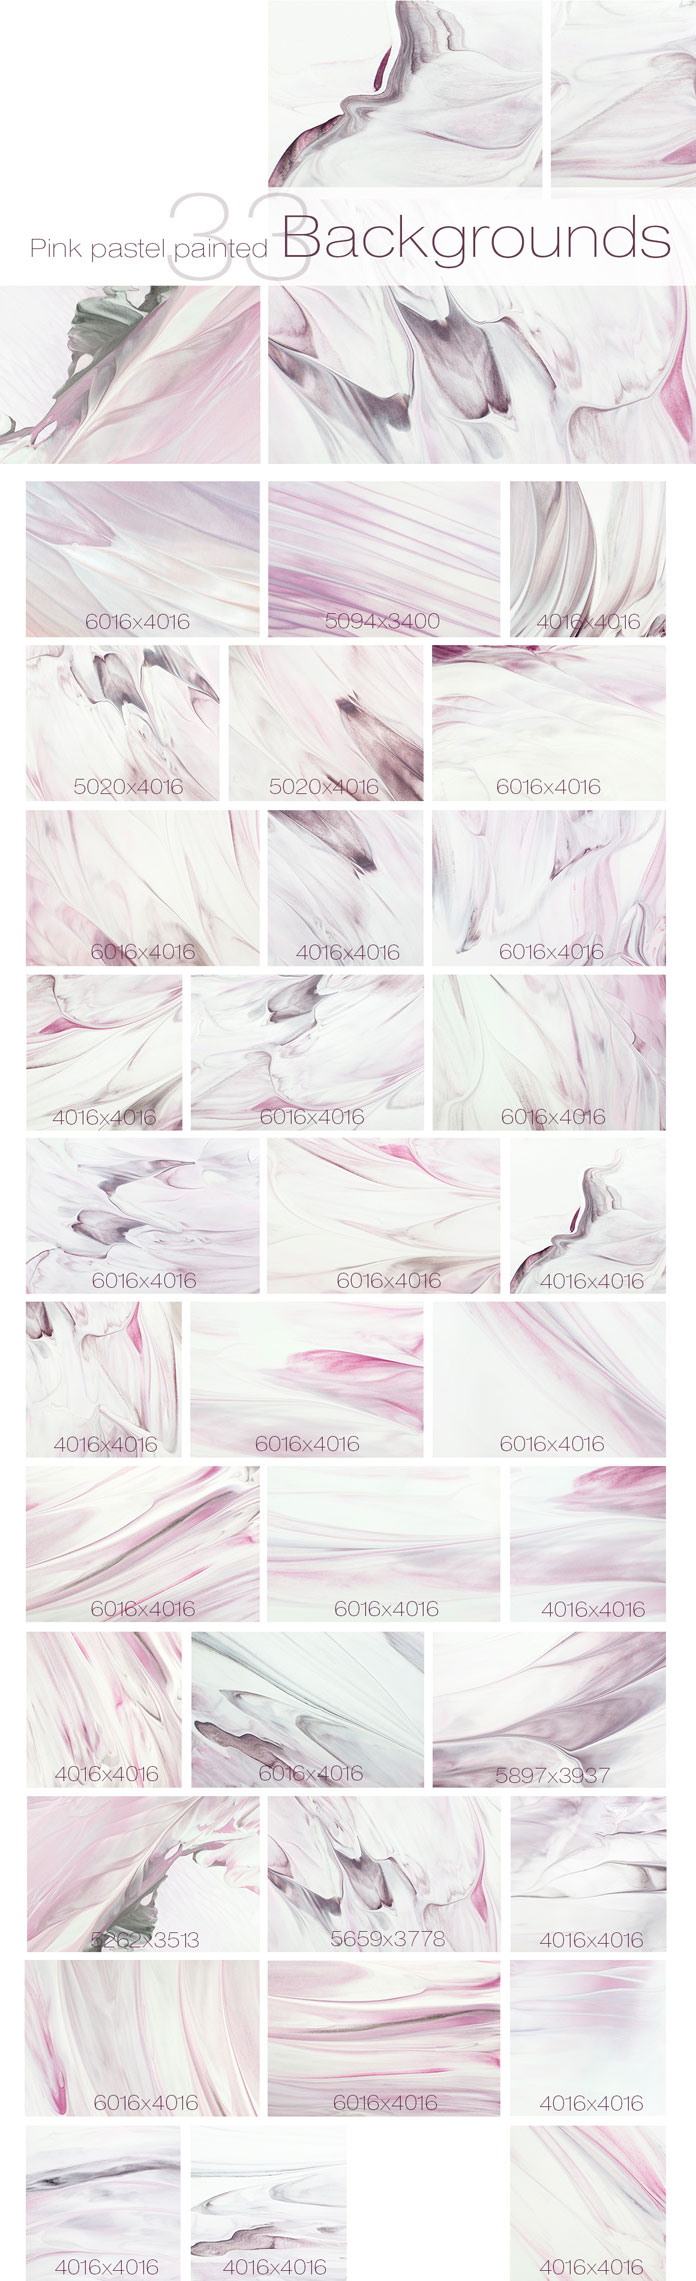 33 pastel painted backgrounds.